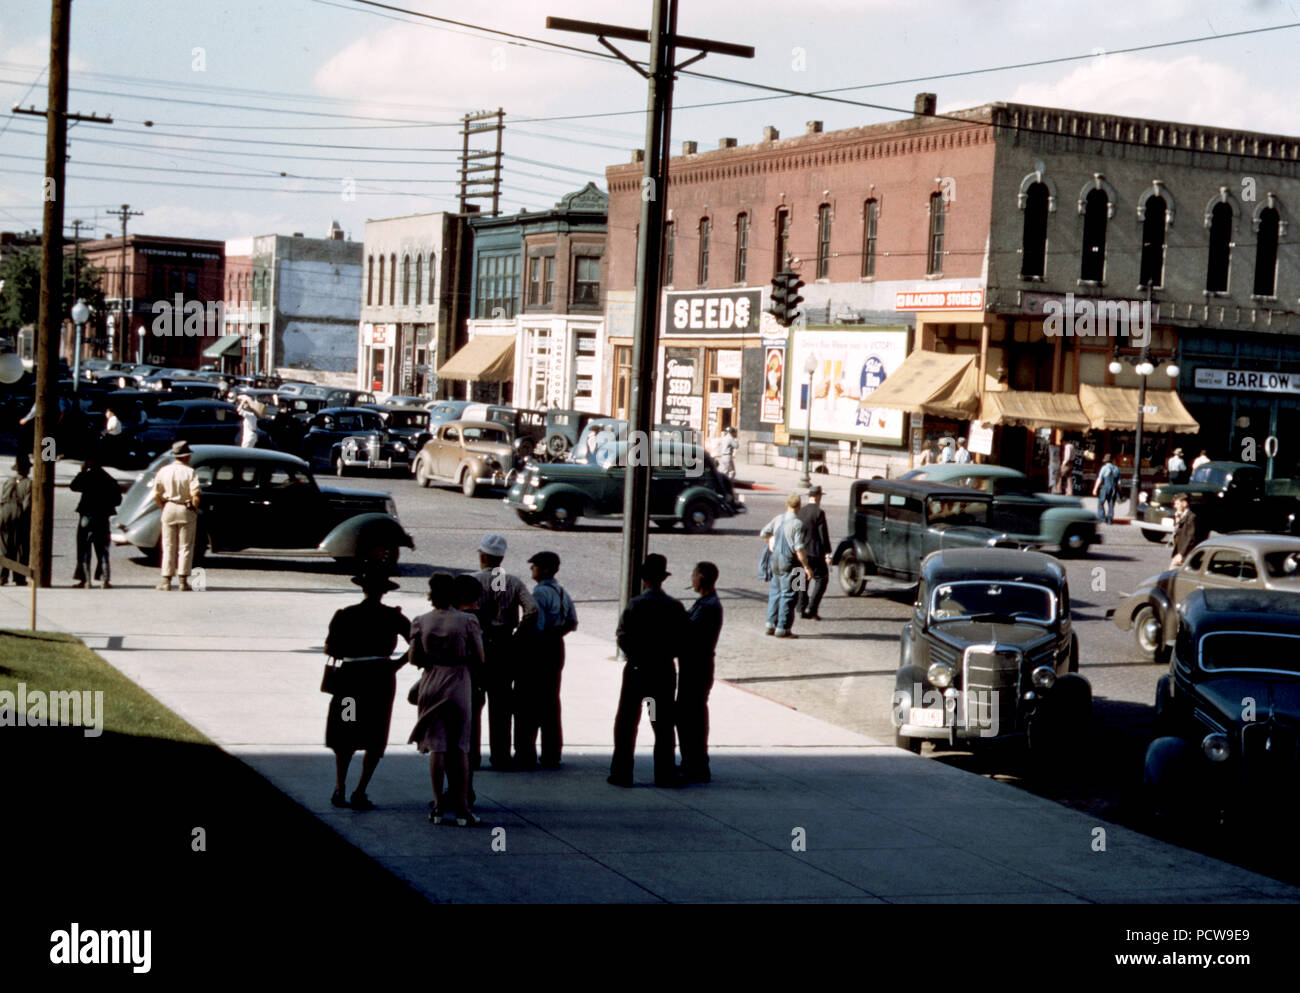 Nebraska feed and seed store - Photo shows a 1935 Ford parked in the  sunlight, facing the camera. Lincoln Nebraska ca 1942 Stock Photo - Alamy